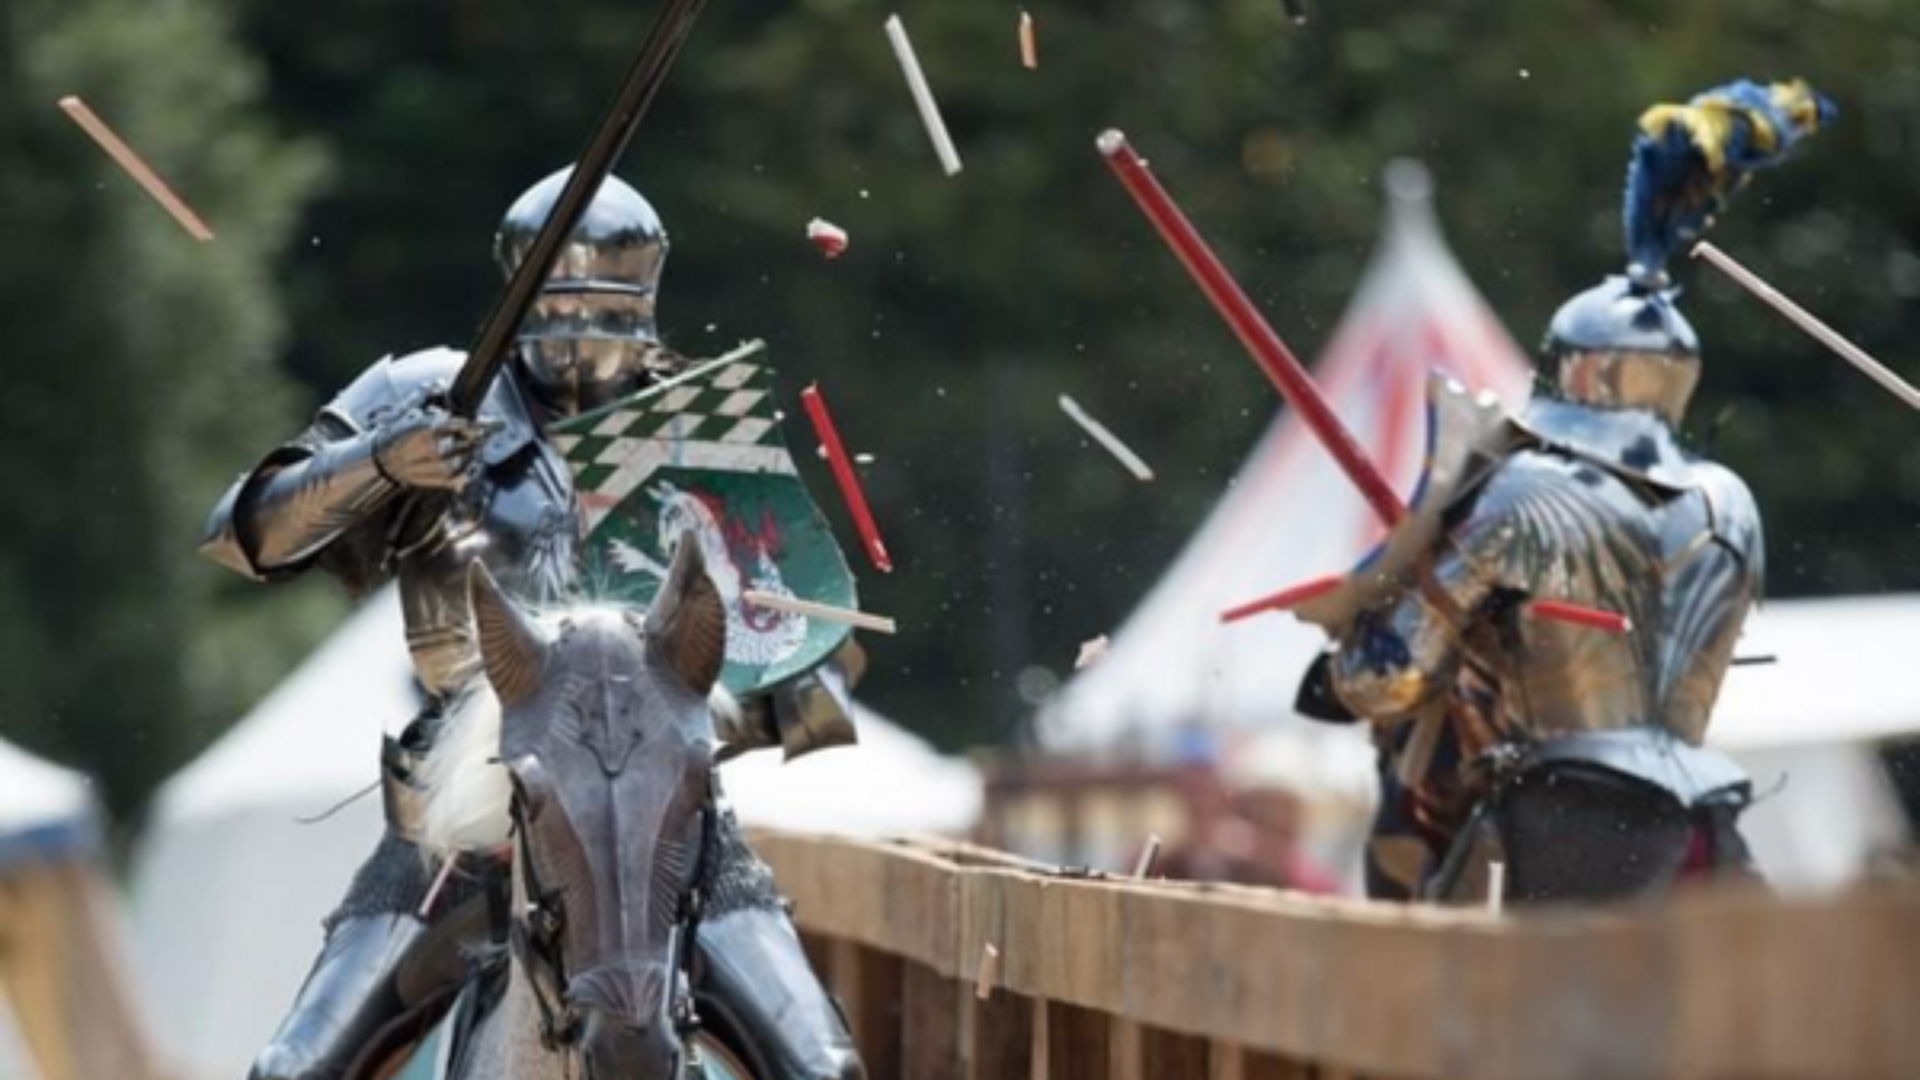 Two medieval knights on horseback jousting